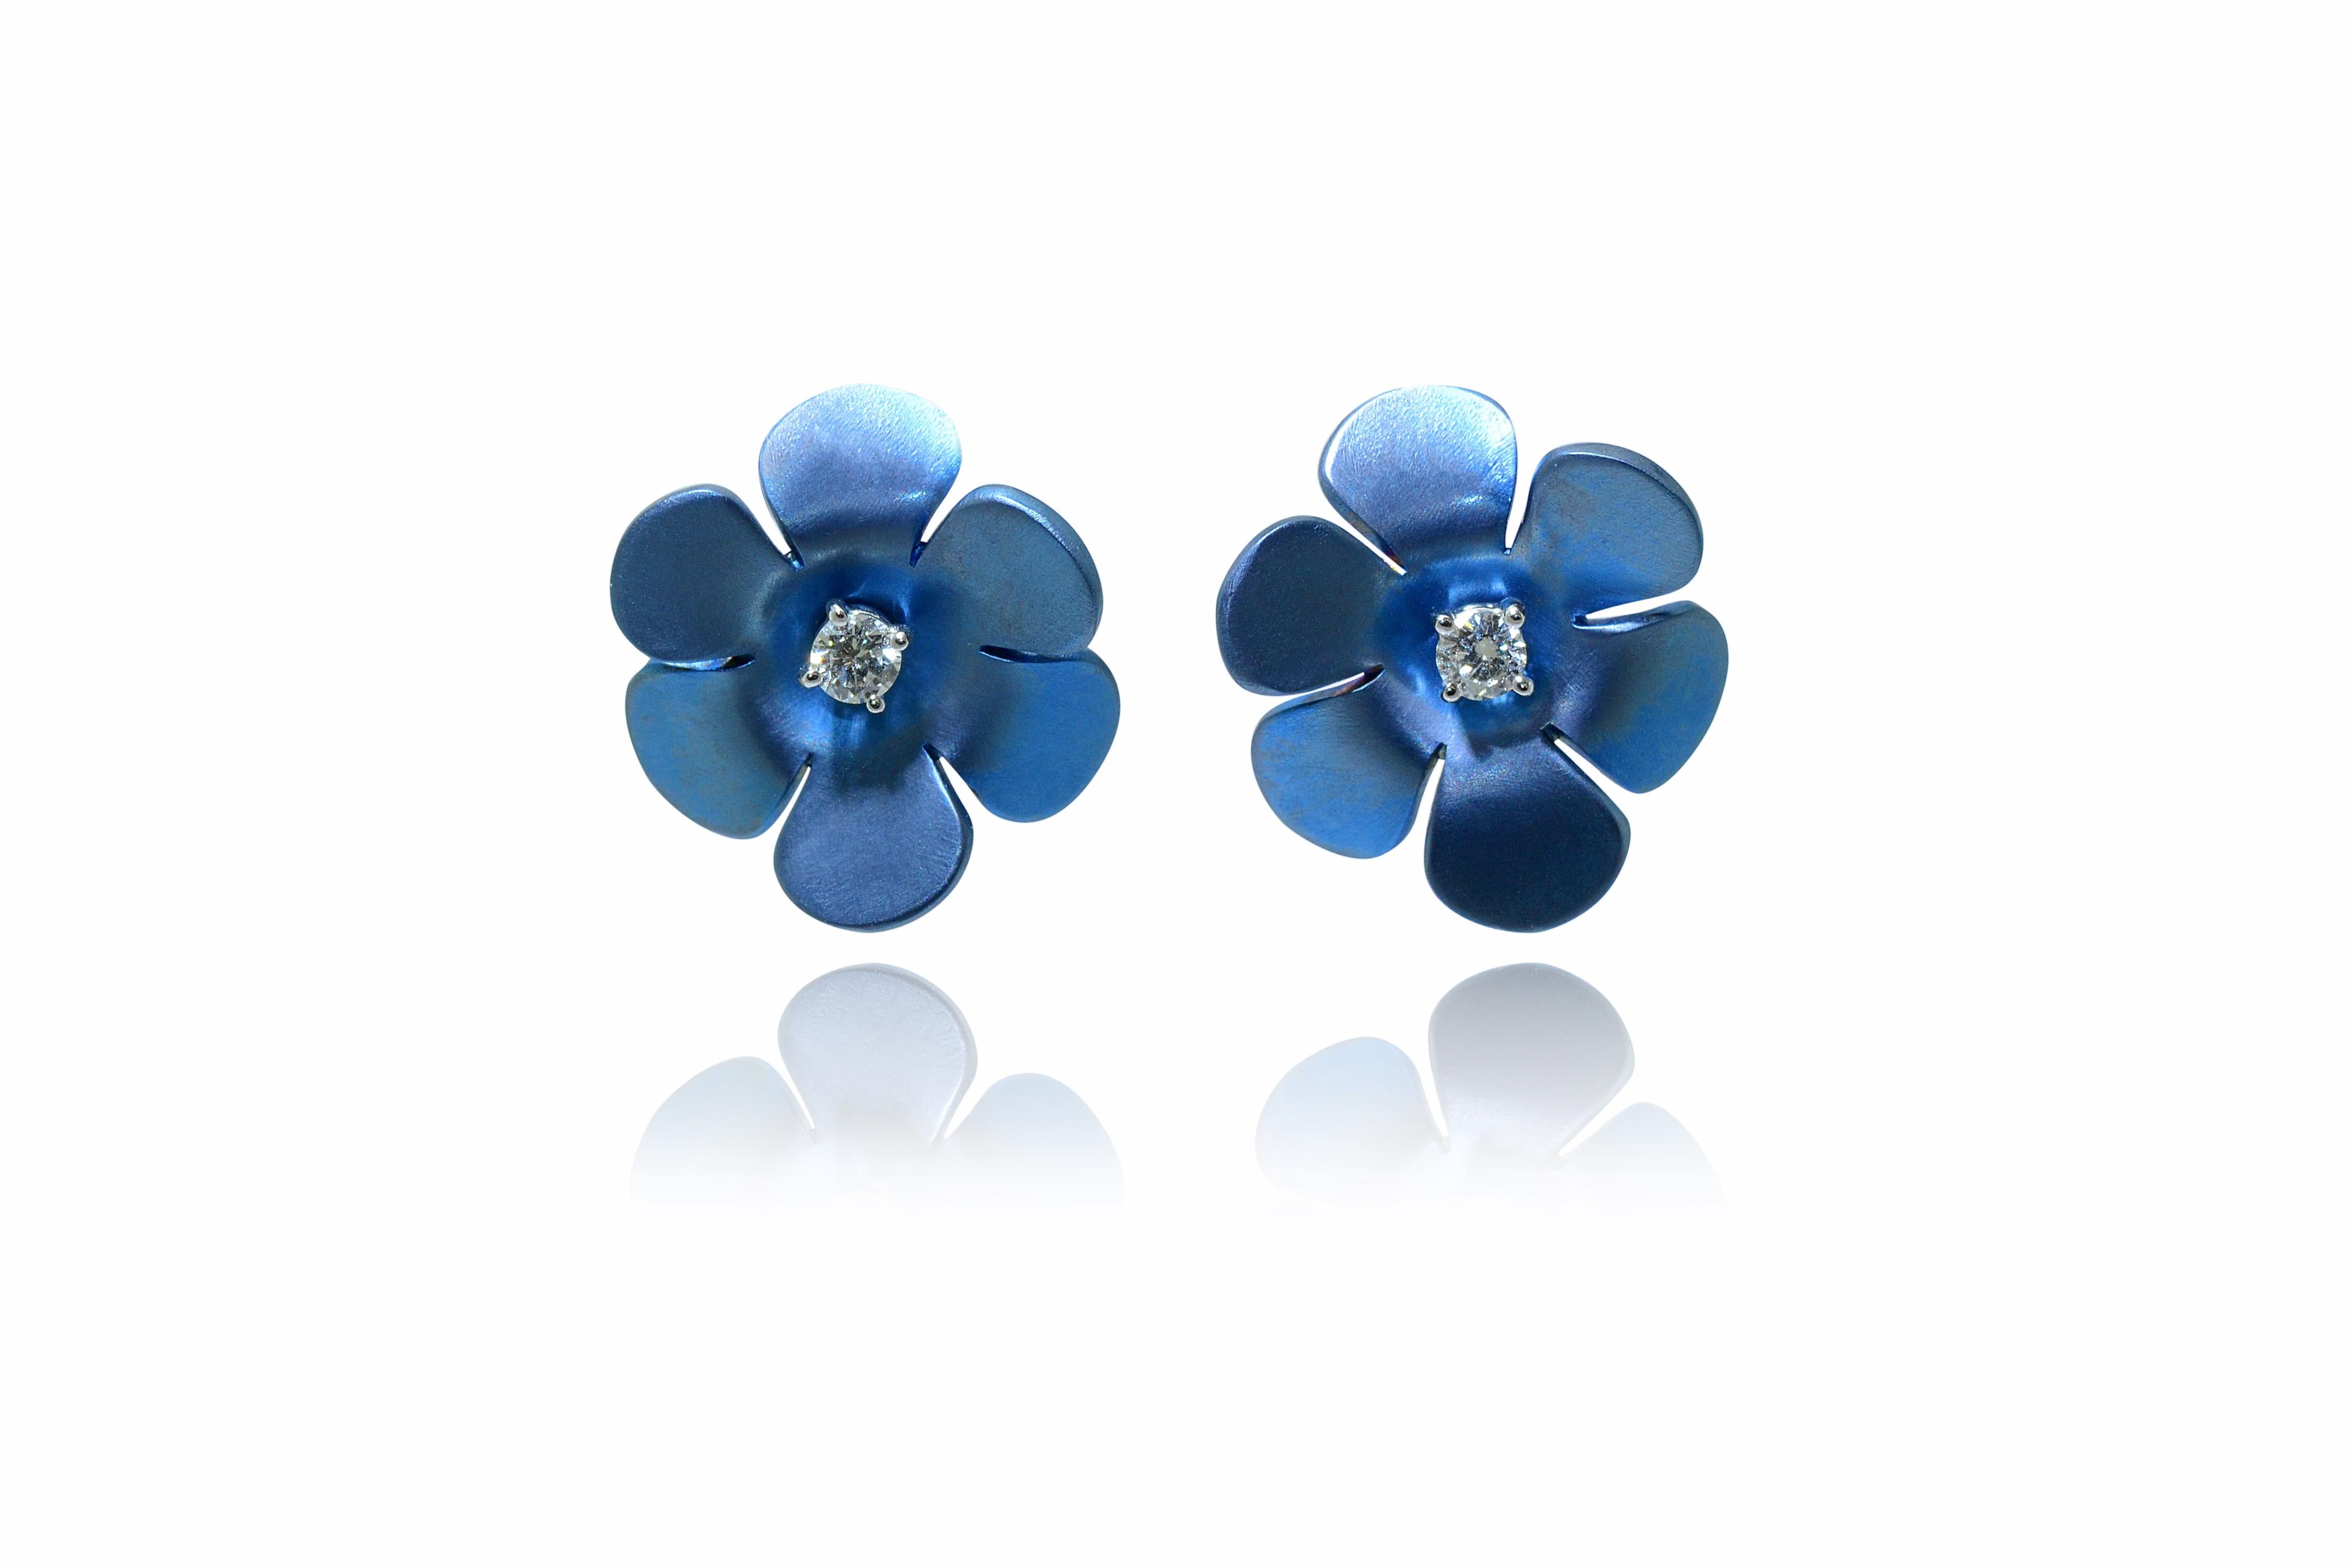 Handcrafted in Margherita Burgener family workshop located in Valenza, Italy, the  earrings flower motif are centering a single diamond, set in 18 Kt white gold. 
Studs diamond can be taken out and used as single studs.
Perfect everyday precious